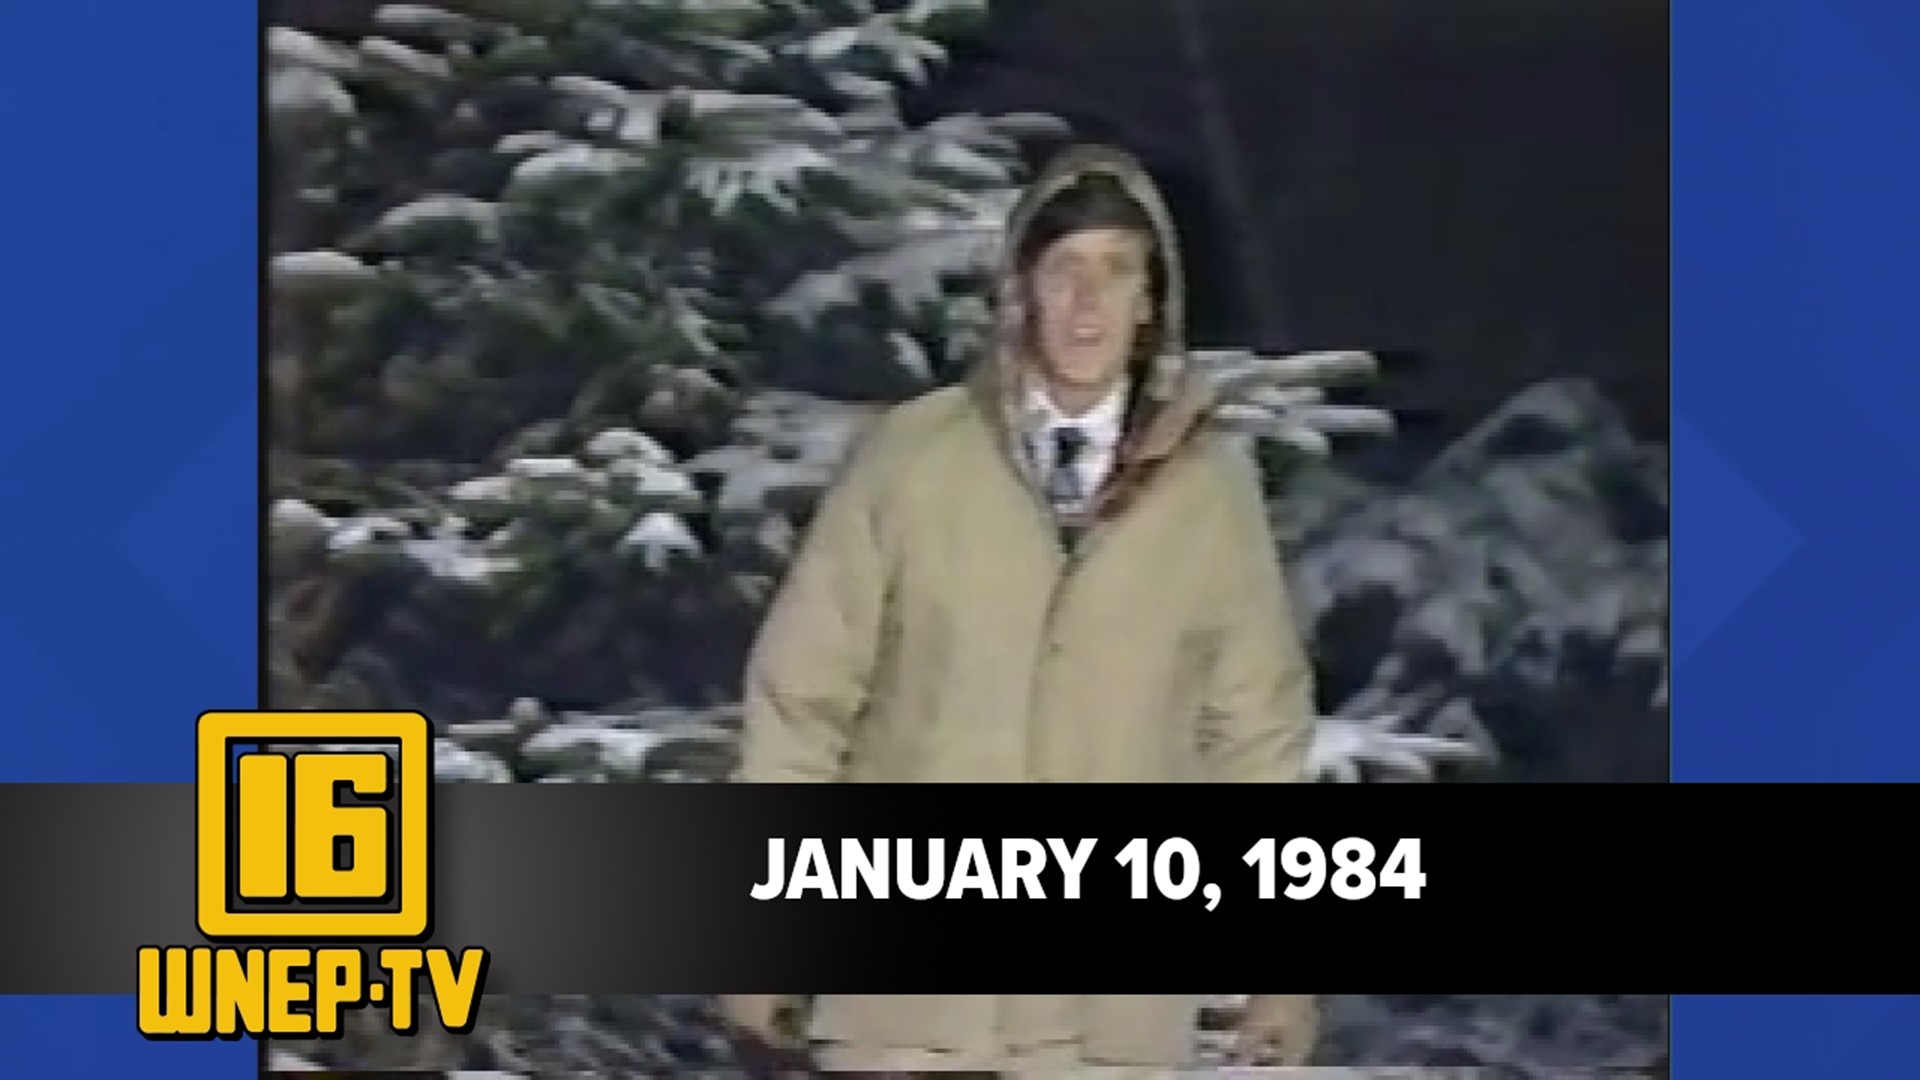 Join Karen Harch and Nolan Johannes with curated stories from January 10, 1984.